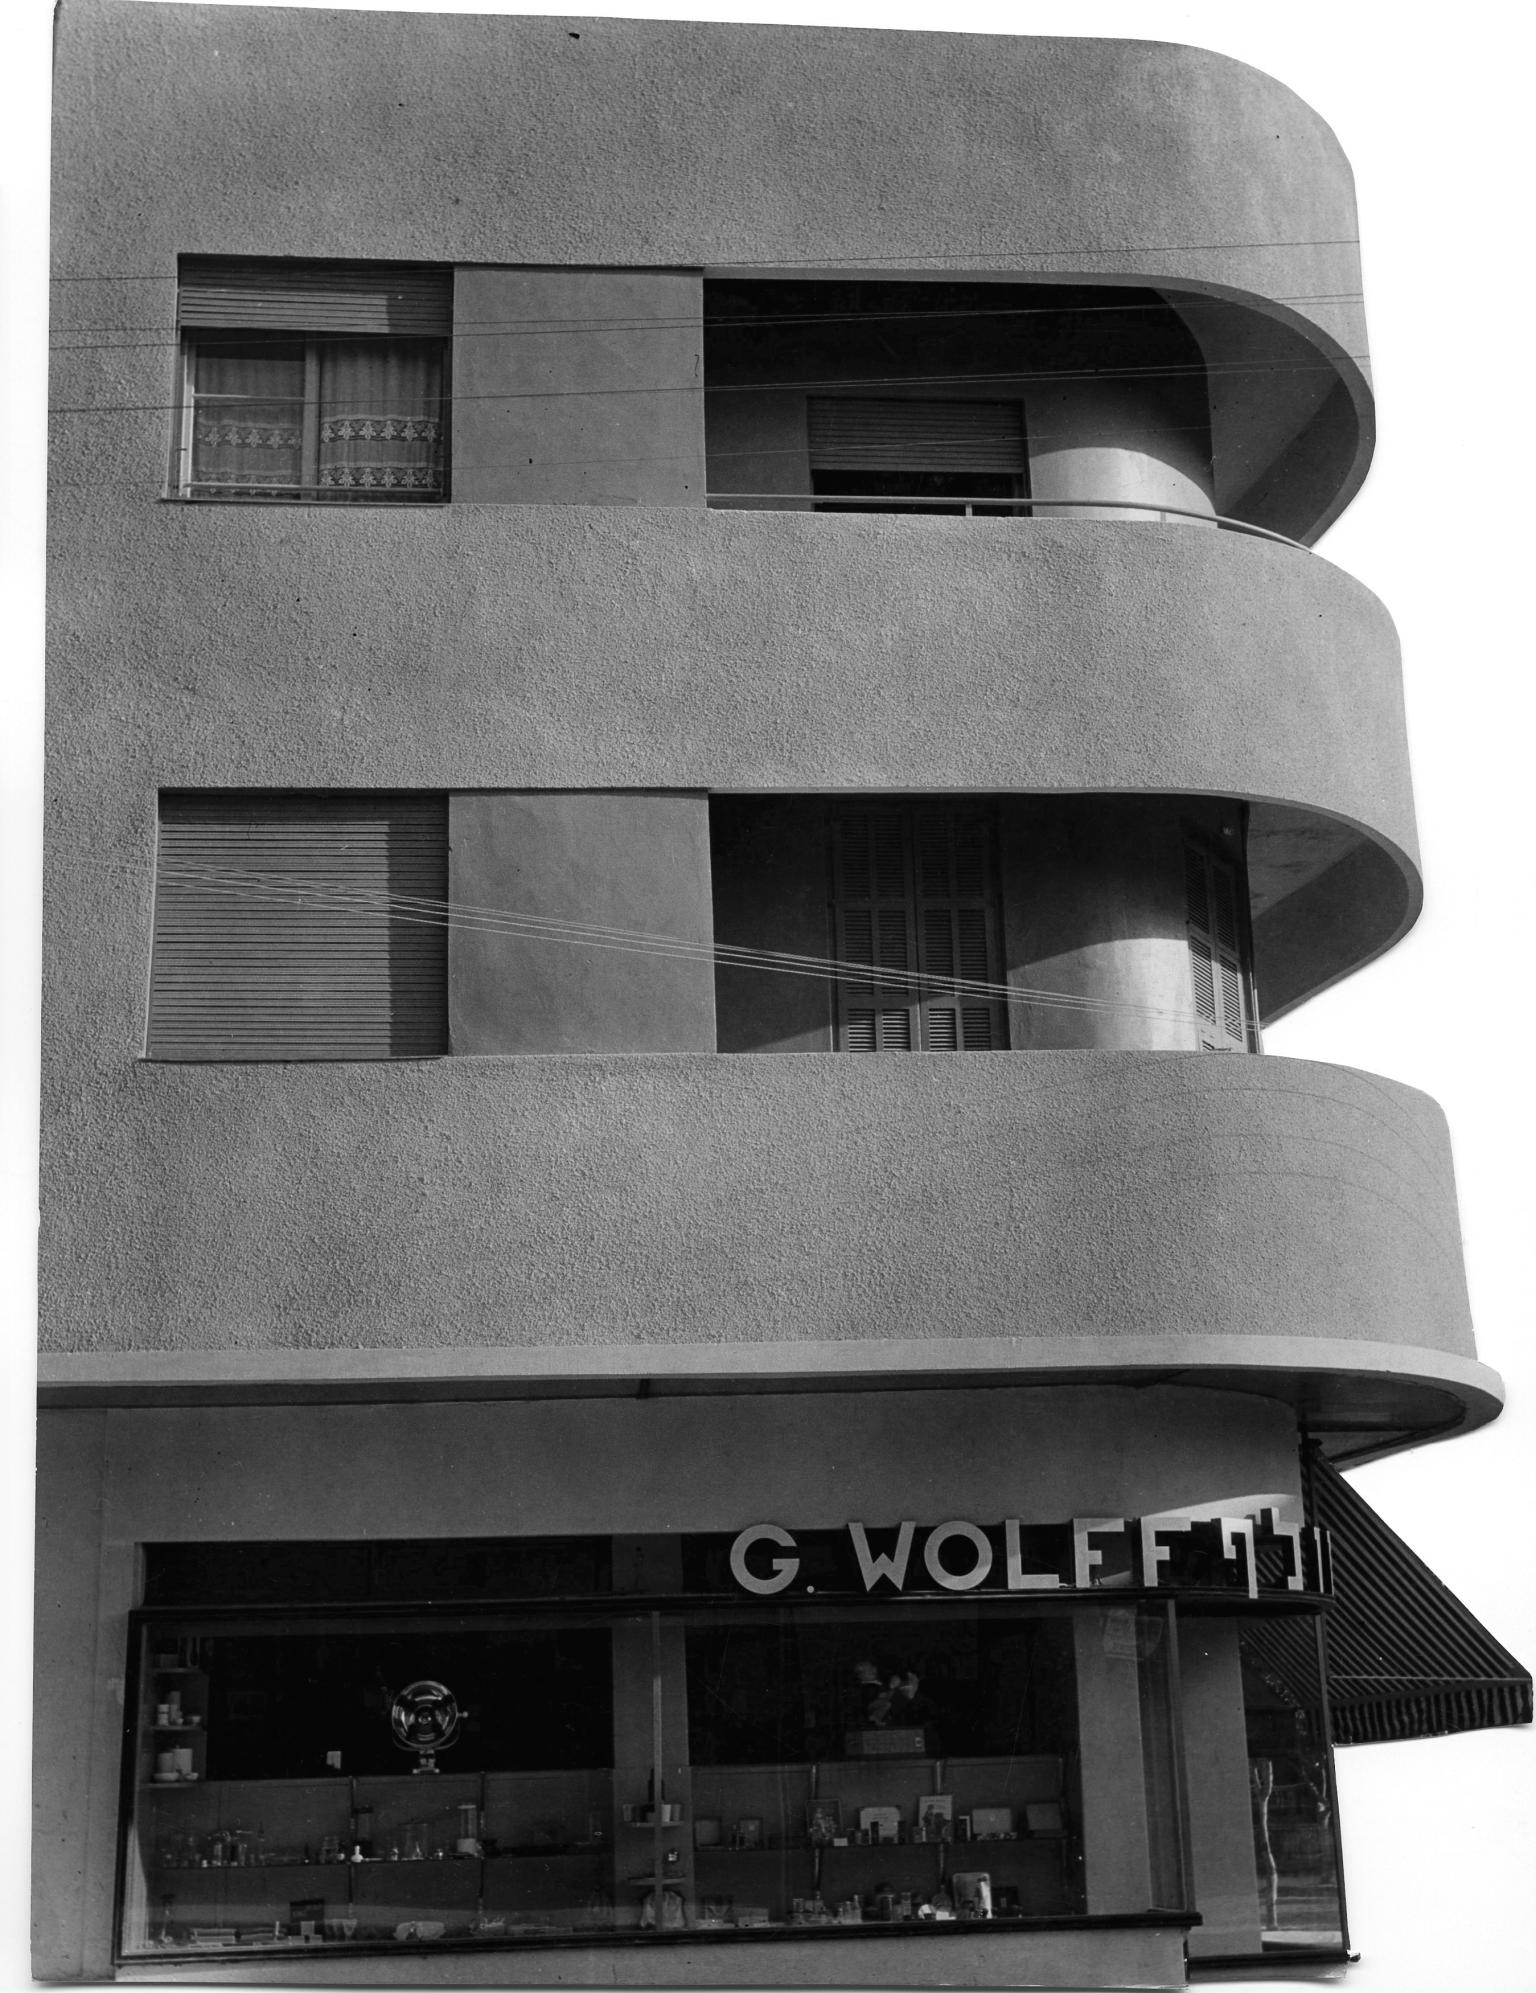 Photograph of side of three-story building exterior featuring sleek, curved balconies.